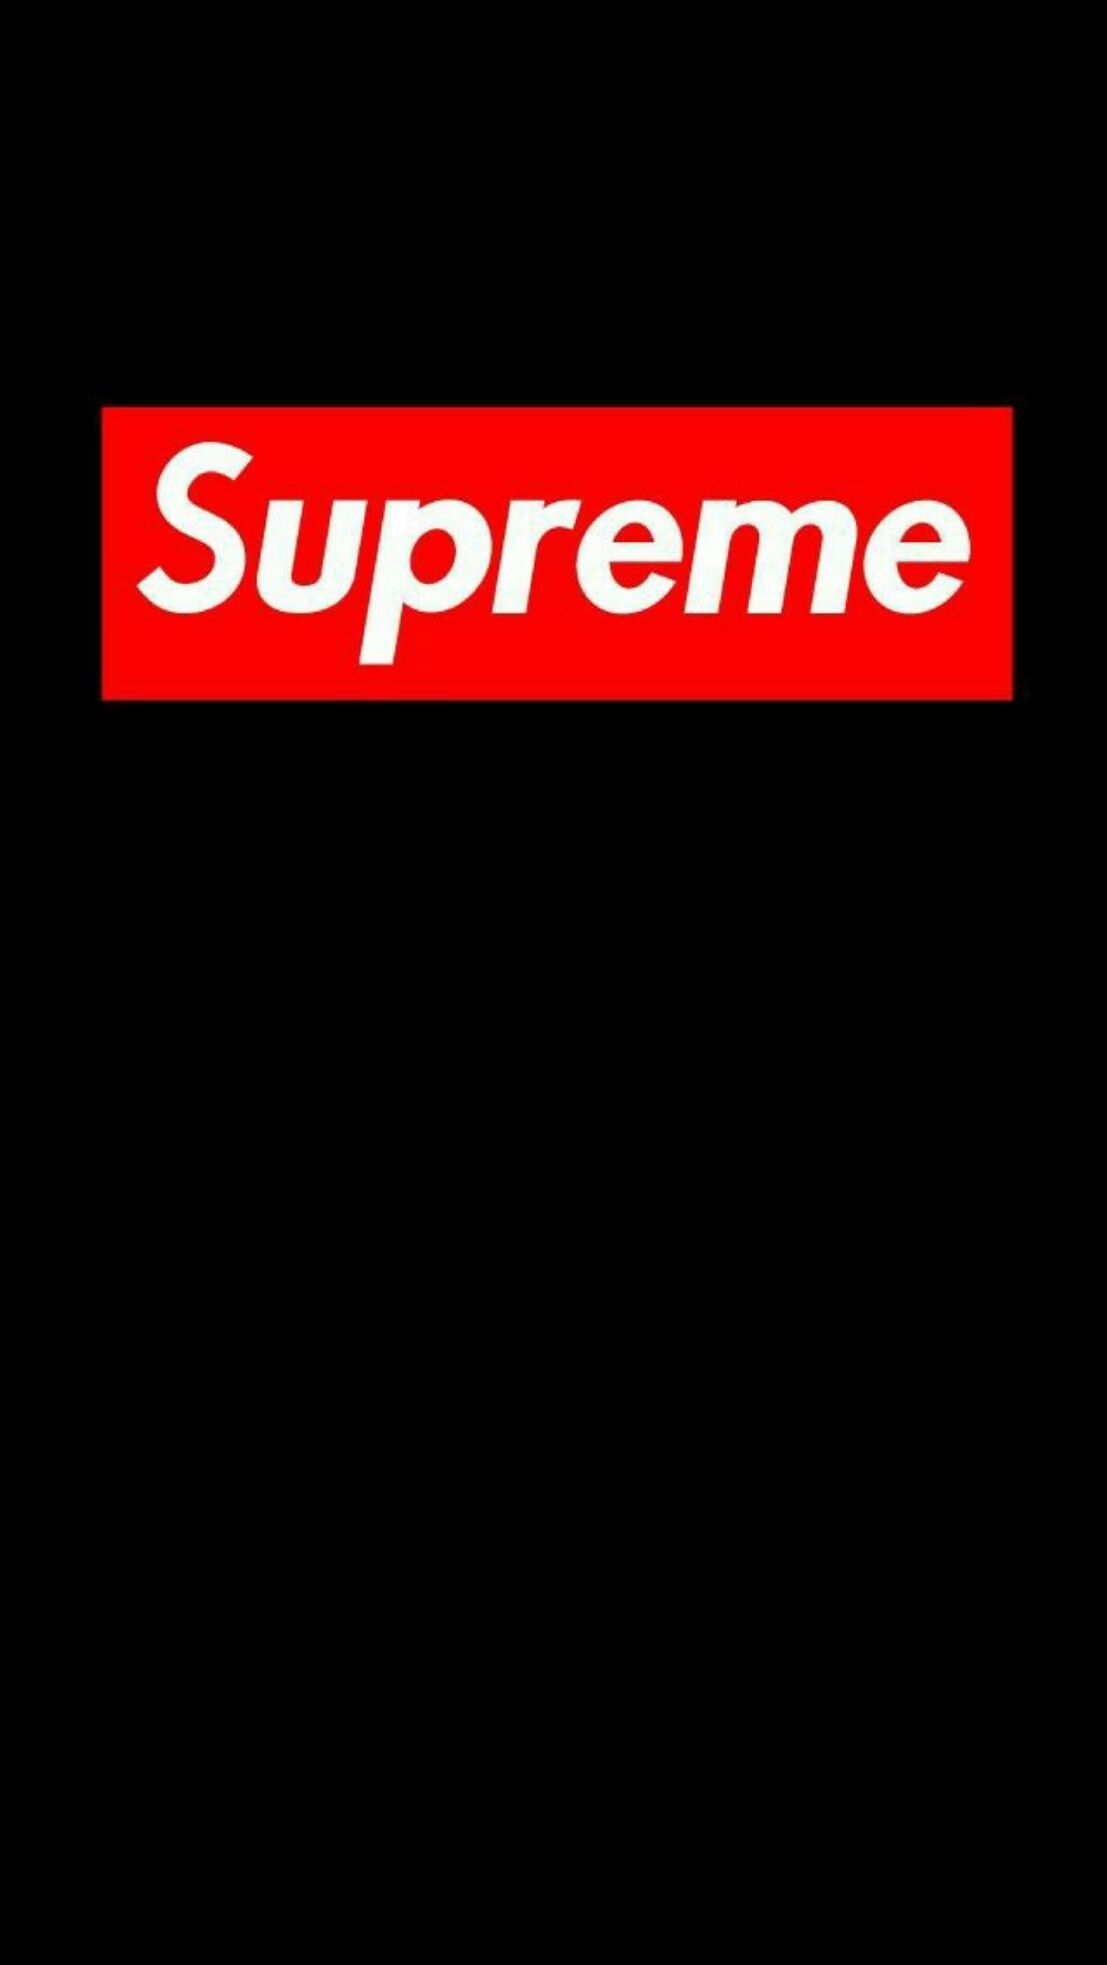 Supreme Black Wallpaper iPhone Android